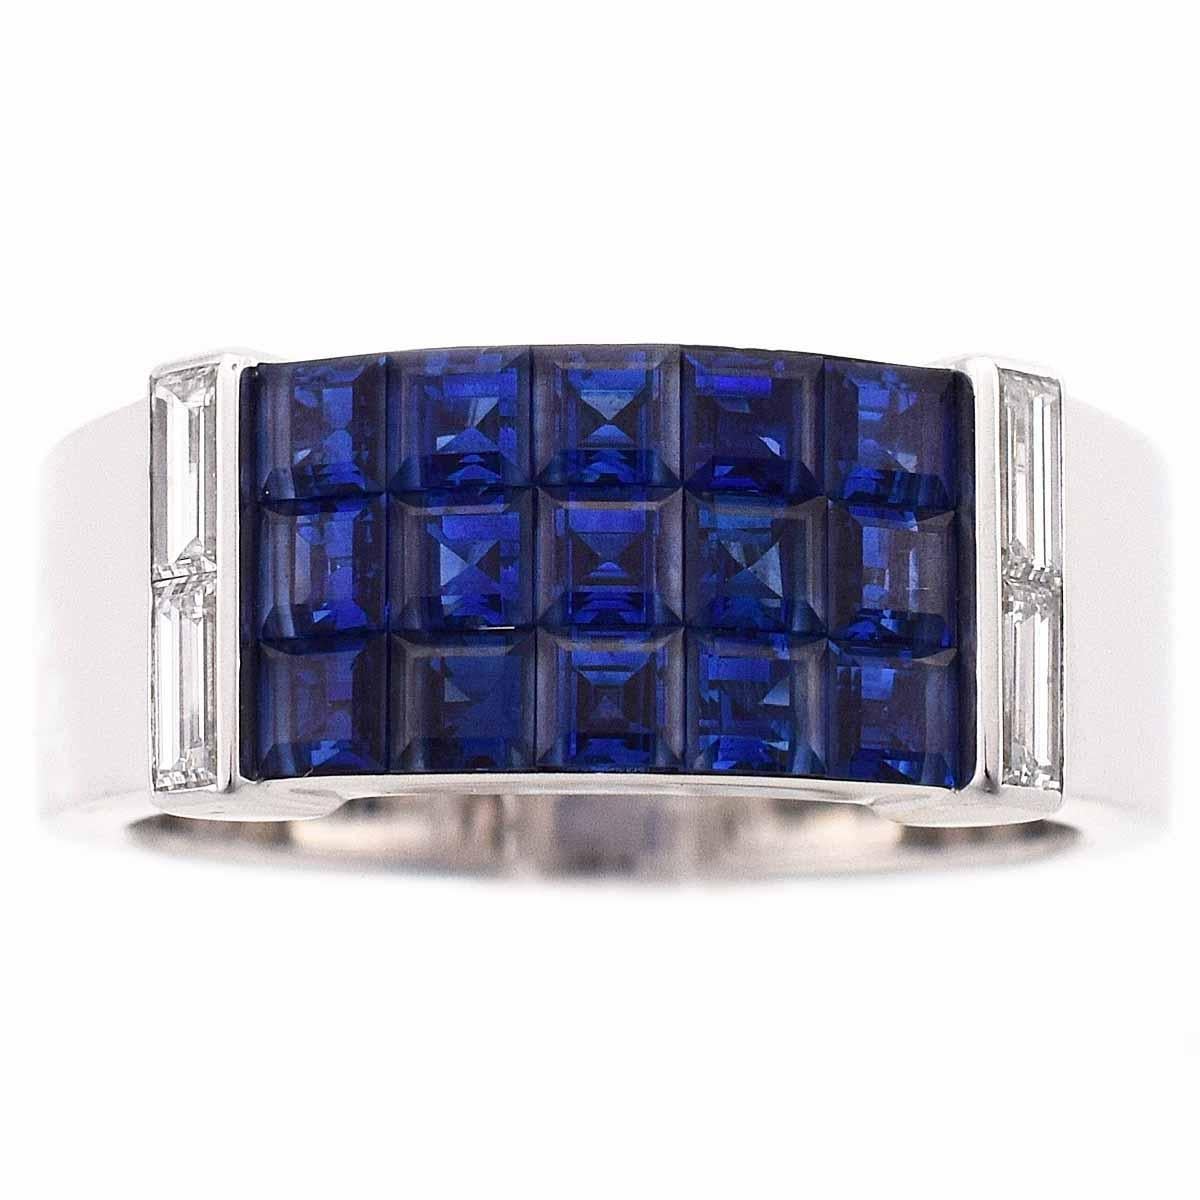 Brand: Van Cleef&Arpels
Name:Pont Neuf Ring
Material :15P Sapphire, 4P Diamonds, 750 K18 WG White Gold
Comes with:Van Cleef&Arpels Box,Case, VCA letter of authenticity(May 2019), VCA repair certificate (July 2019)
Size:British & Australian:O  /   US